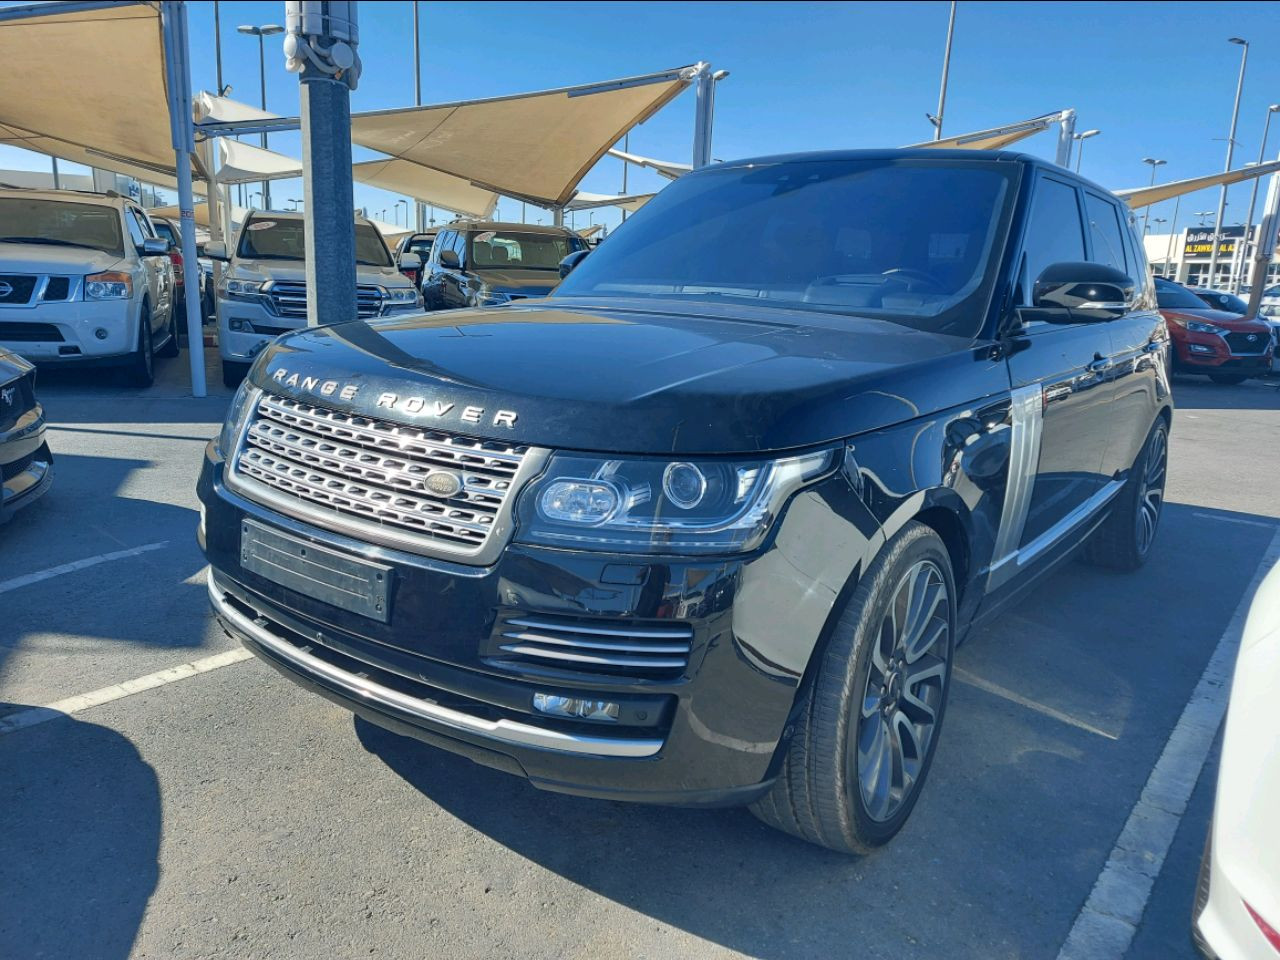 Range Rover Autobiography 2017 AED 290,000, GCC Spec, Good condition, Full Option, US Spec, Turbo, Navigation System, Negotiable